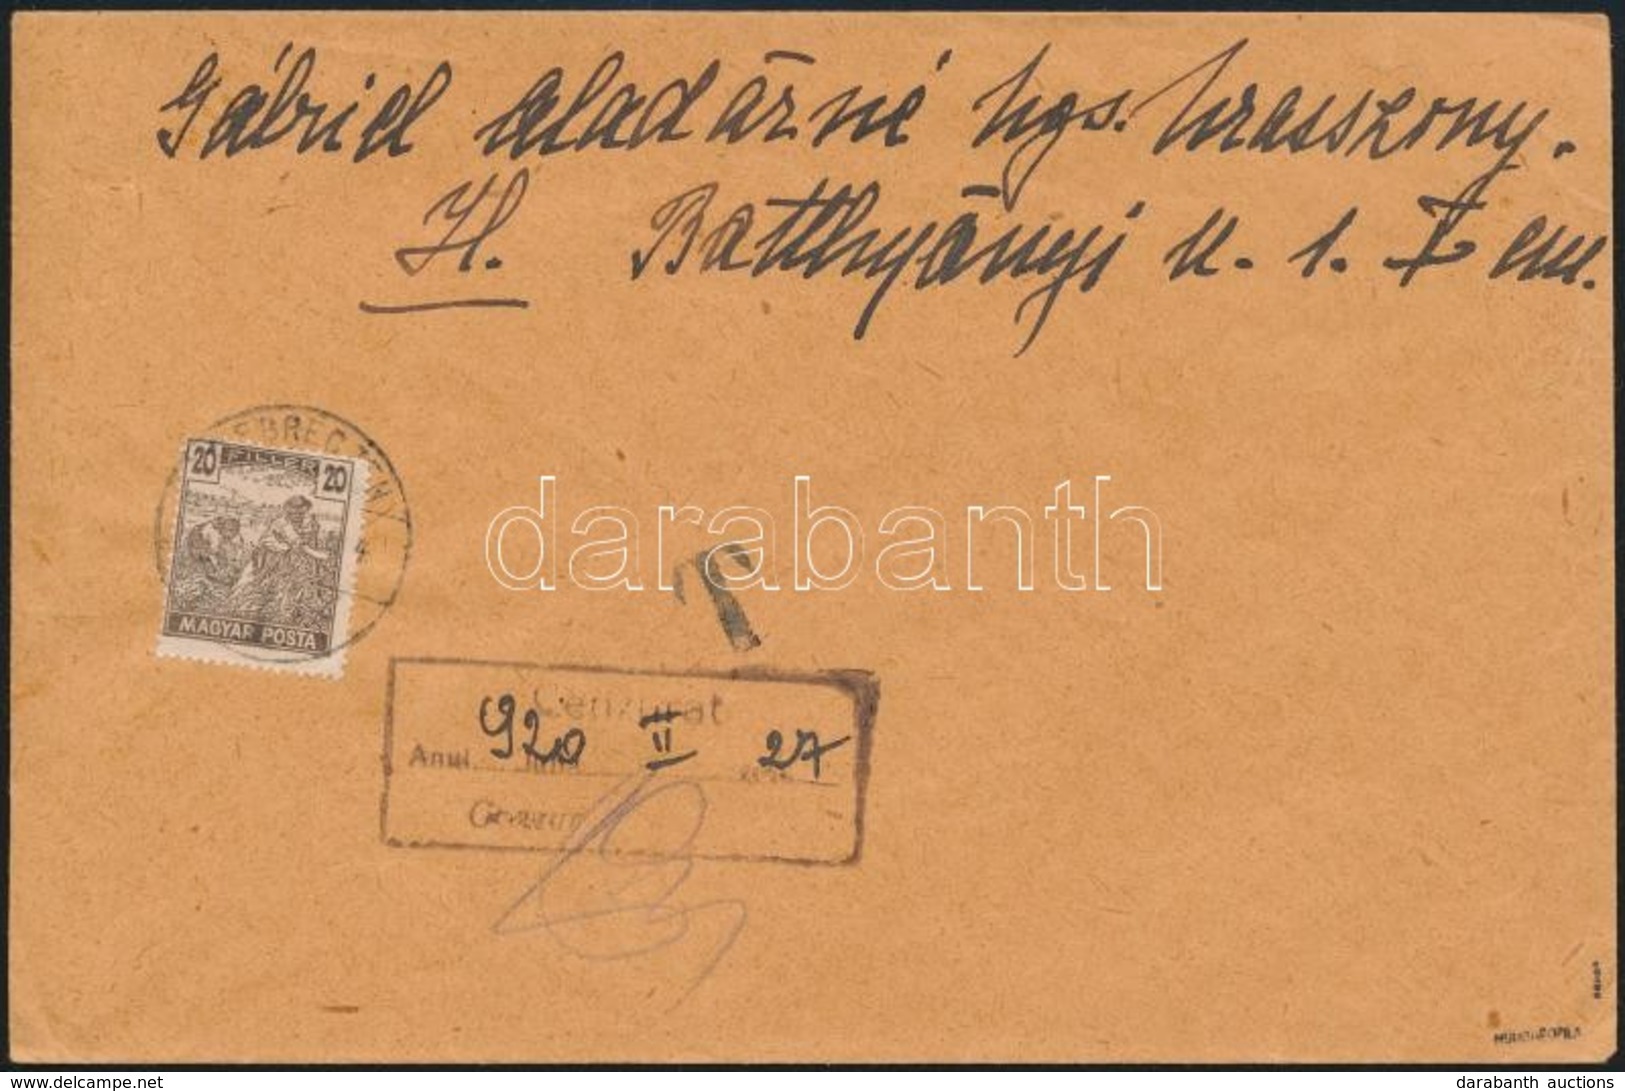 1920 Portós Cenzúrás Levél / Censored Cover With Postage Due. Signed: Bodor - Other & Unclassified